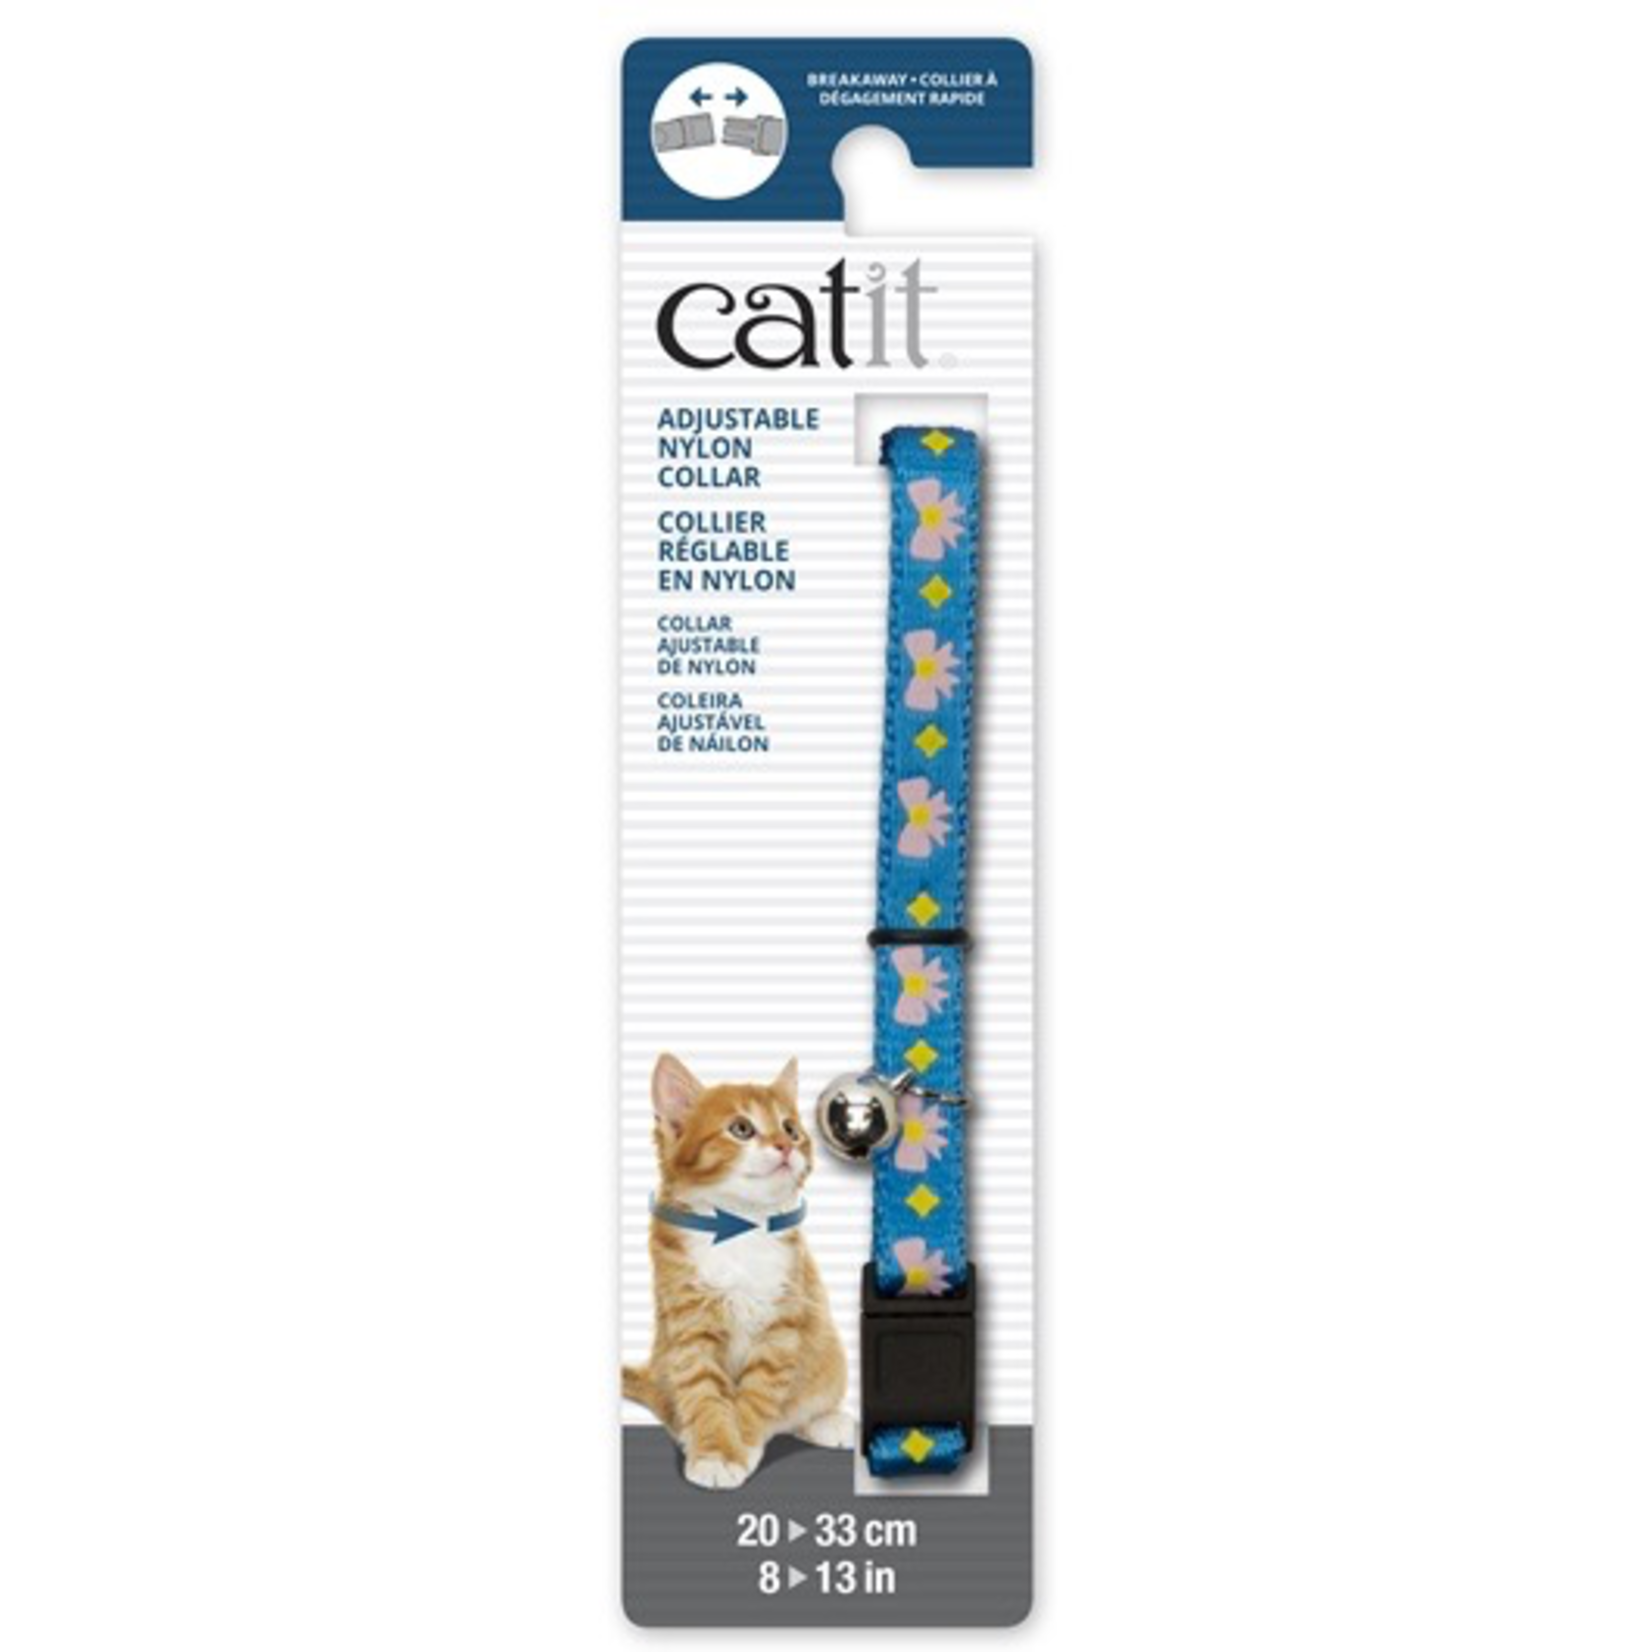 CAT IT Catit Adjustable Breakaway Nylon Collar - Blue with Pink Bows - 20-33 cm (8-13 in)